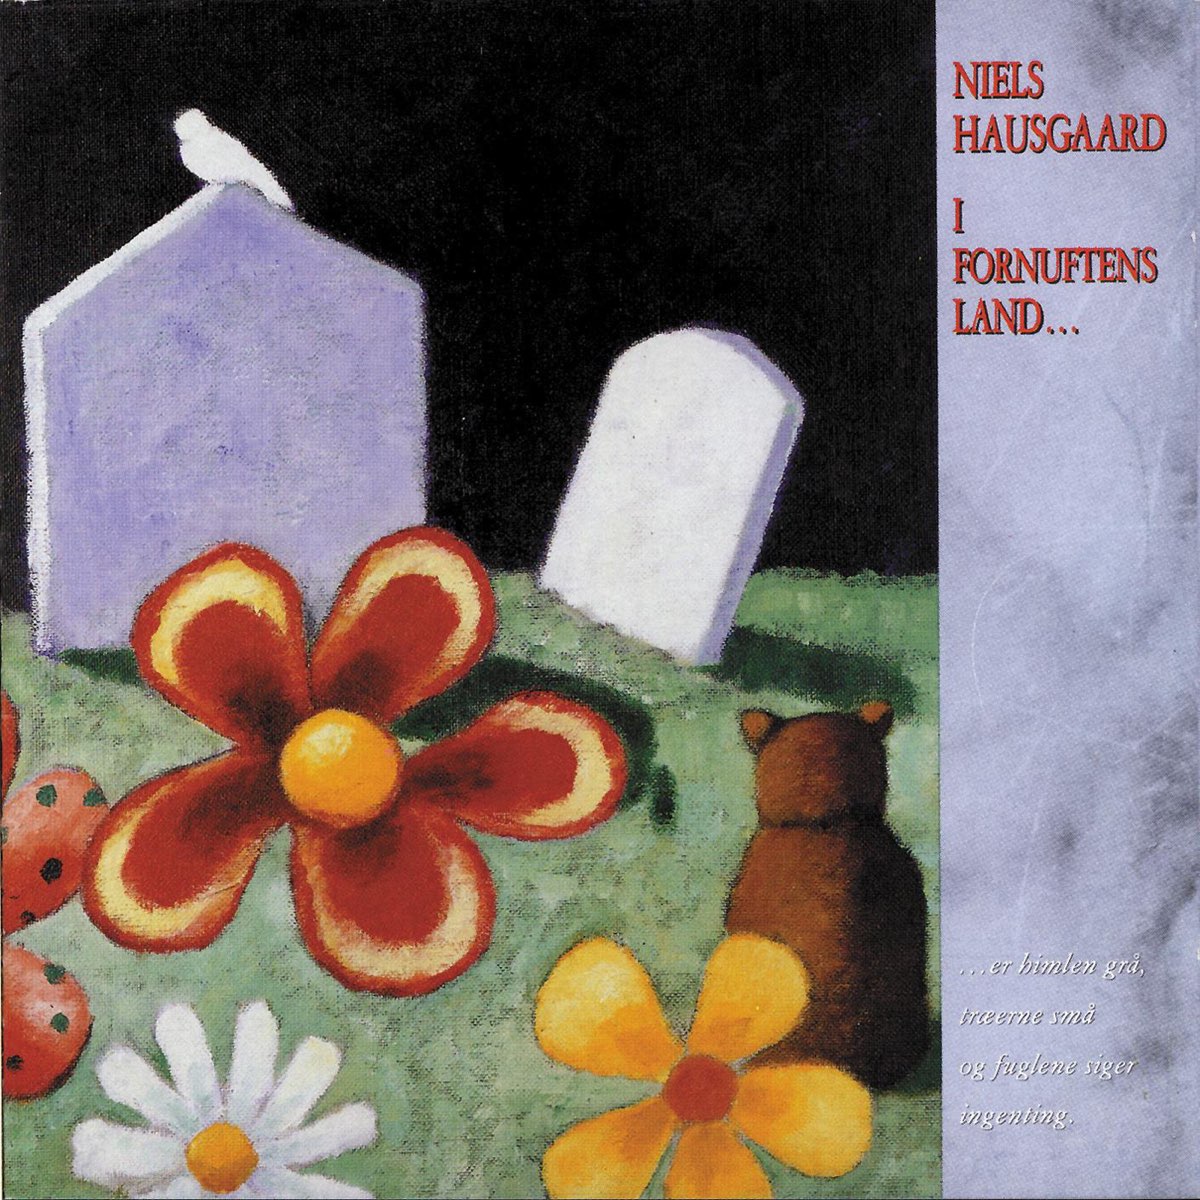 I Fornuftens Land by Niels Hausgaard on Apple Music